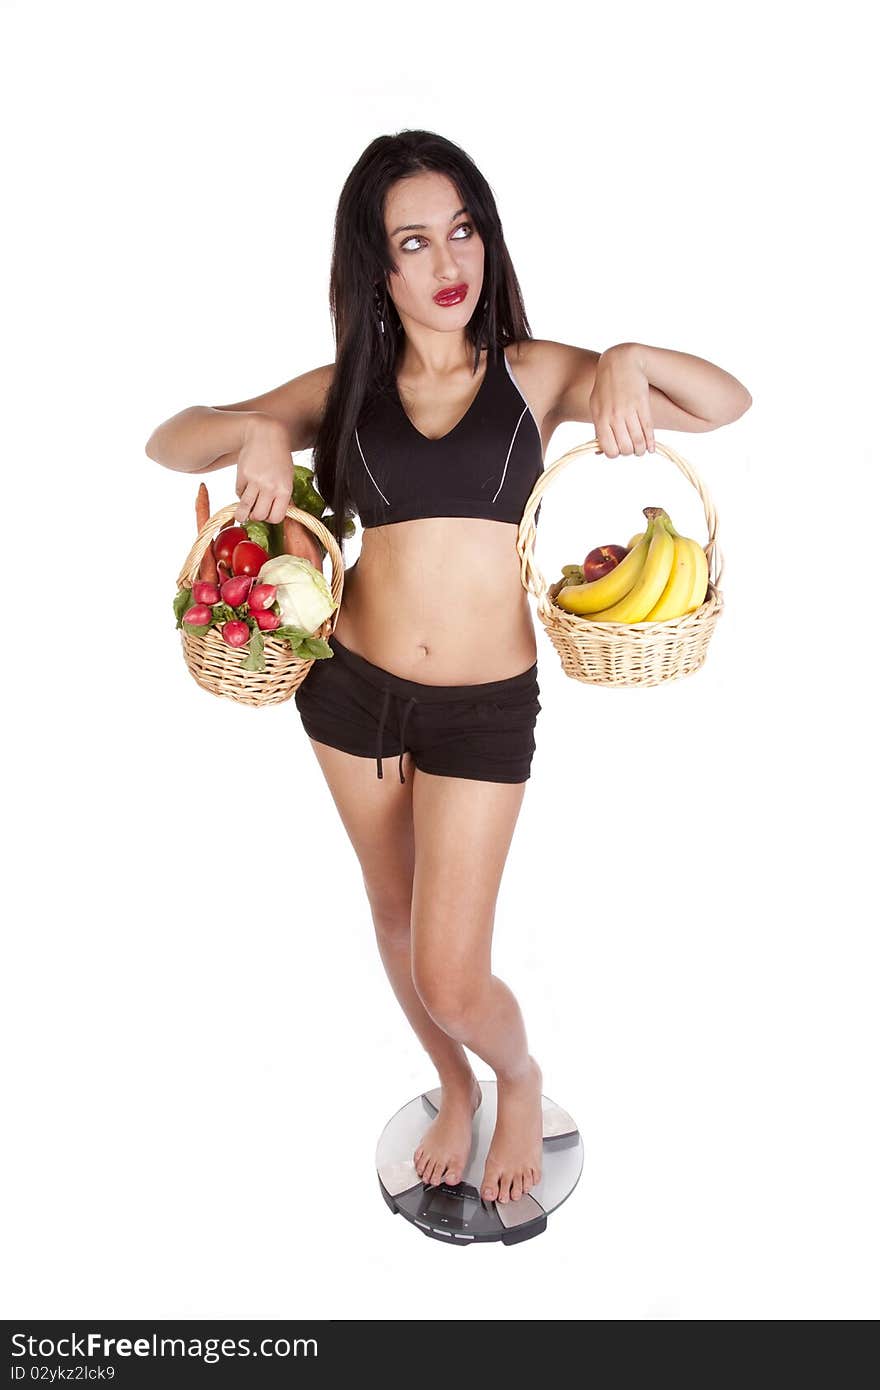 A woman is standing on the scales holding fruit and vegetables. A woman is standing on the scales holding fruit and vegetables.